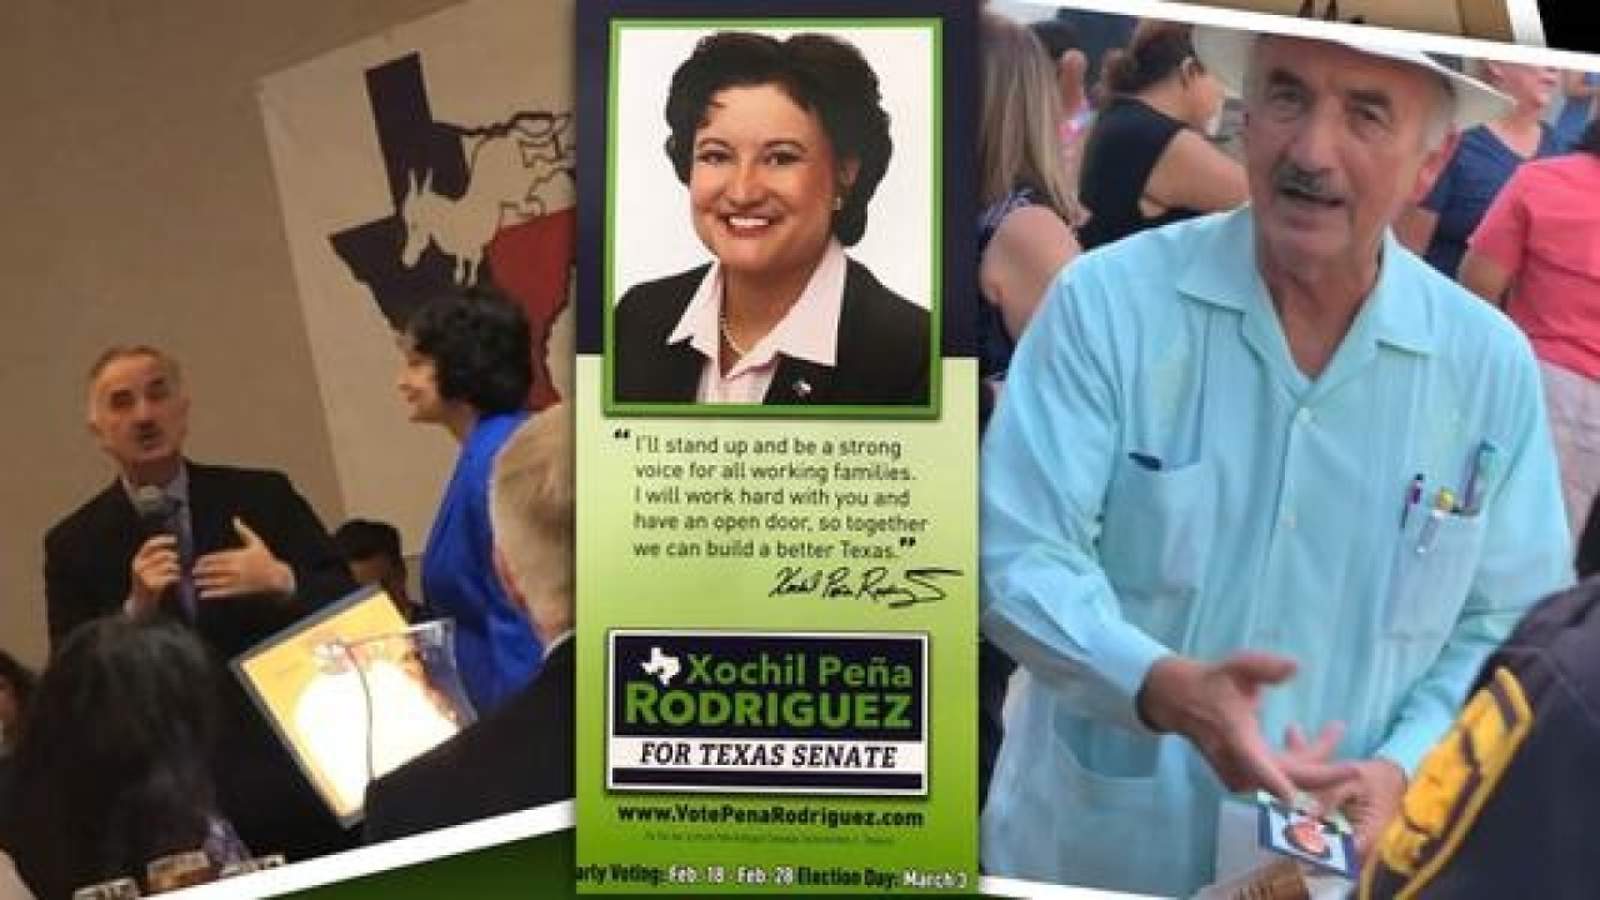 WATCH: Judge campaigns for daughter in Texas senate race; appears to violate state judicial code of conduct